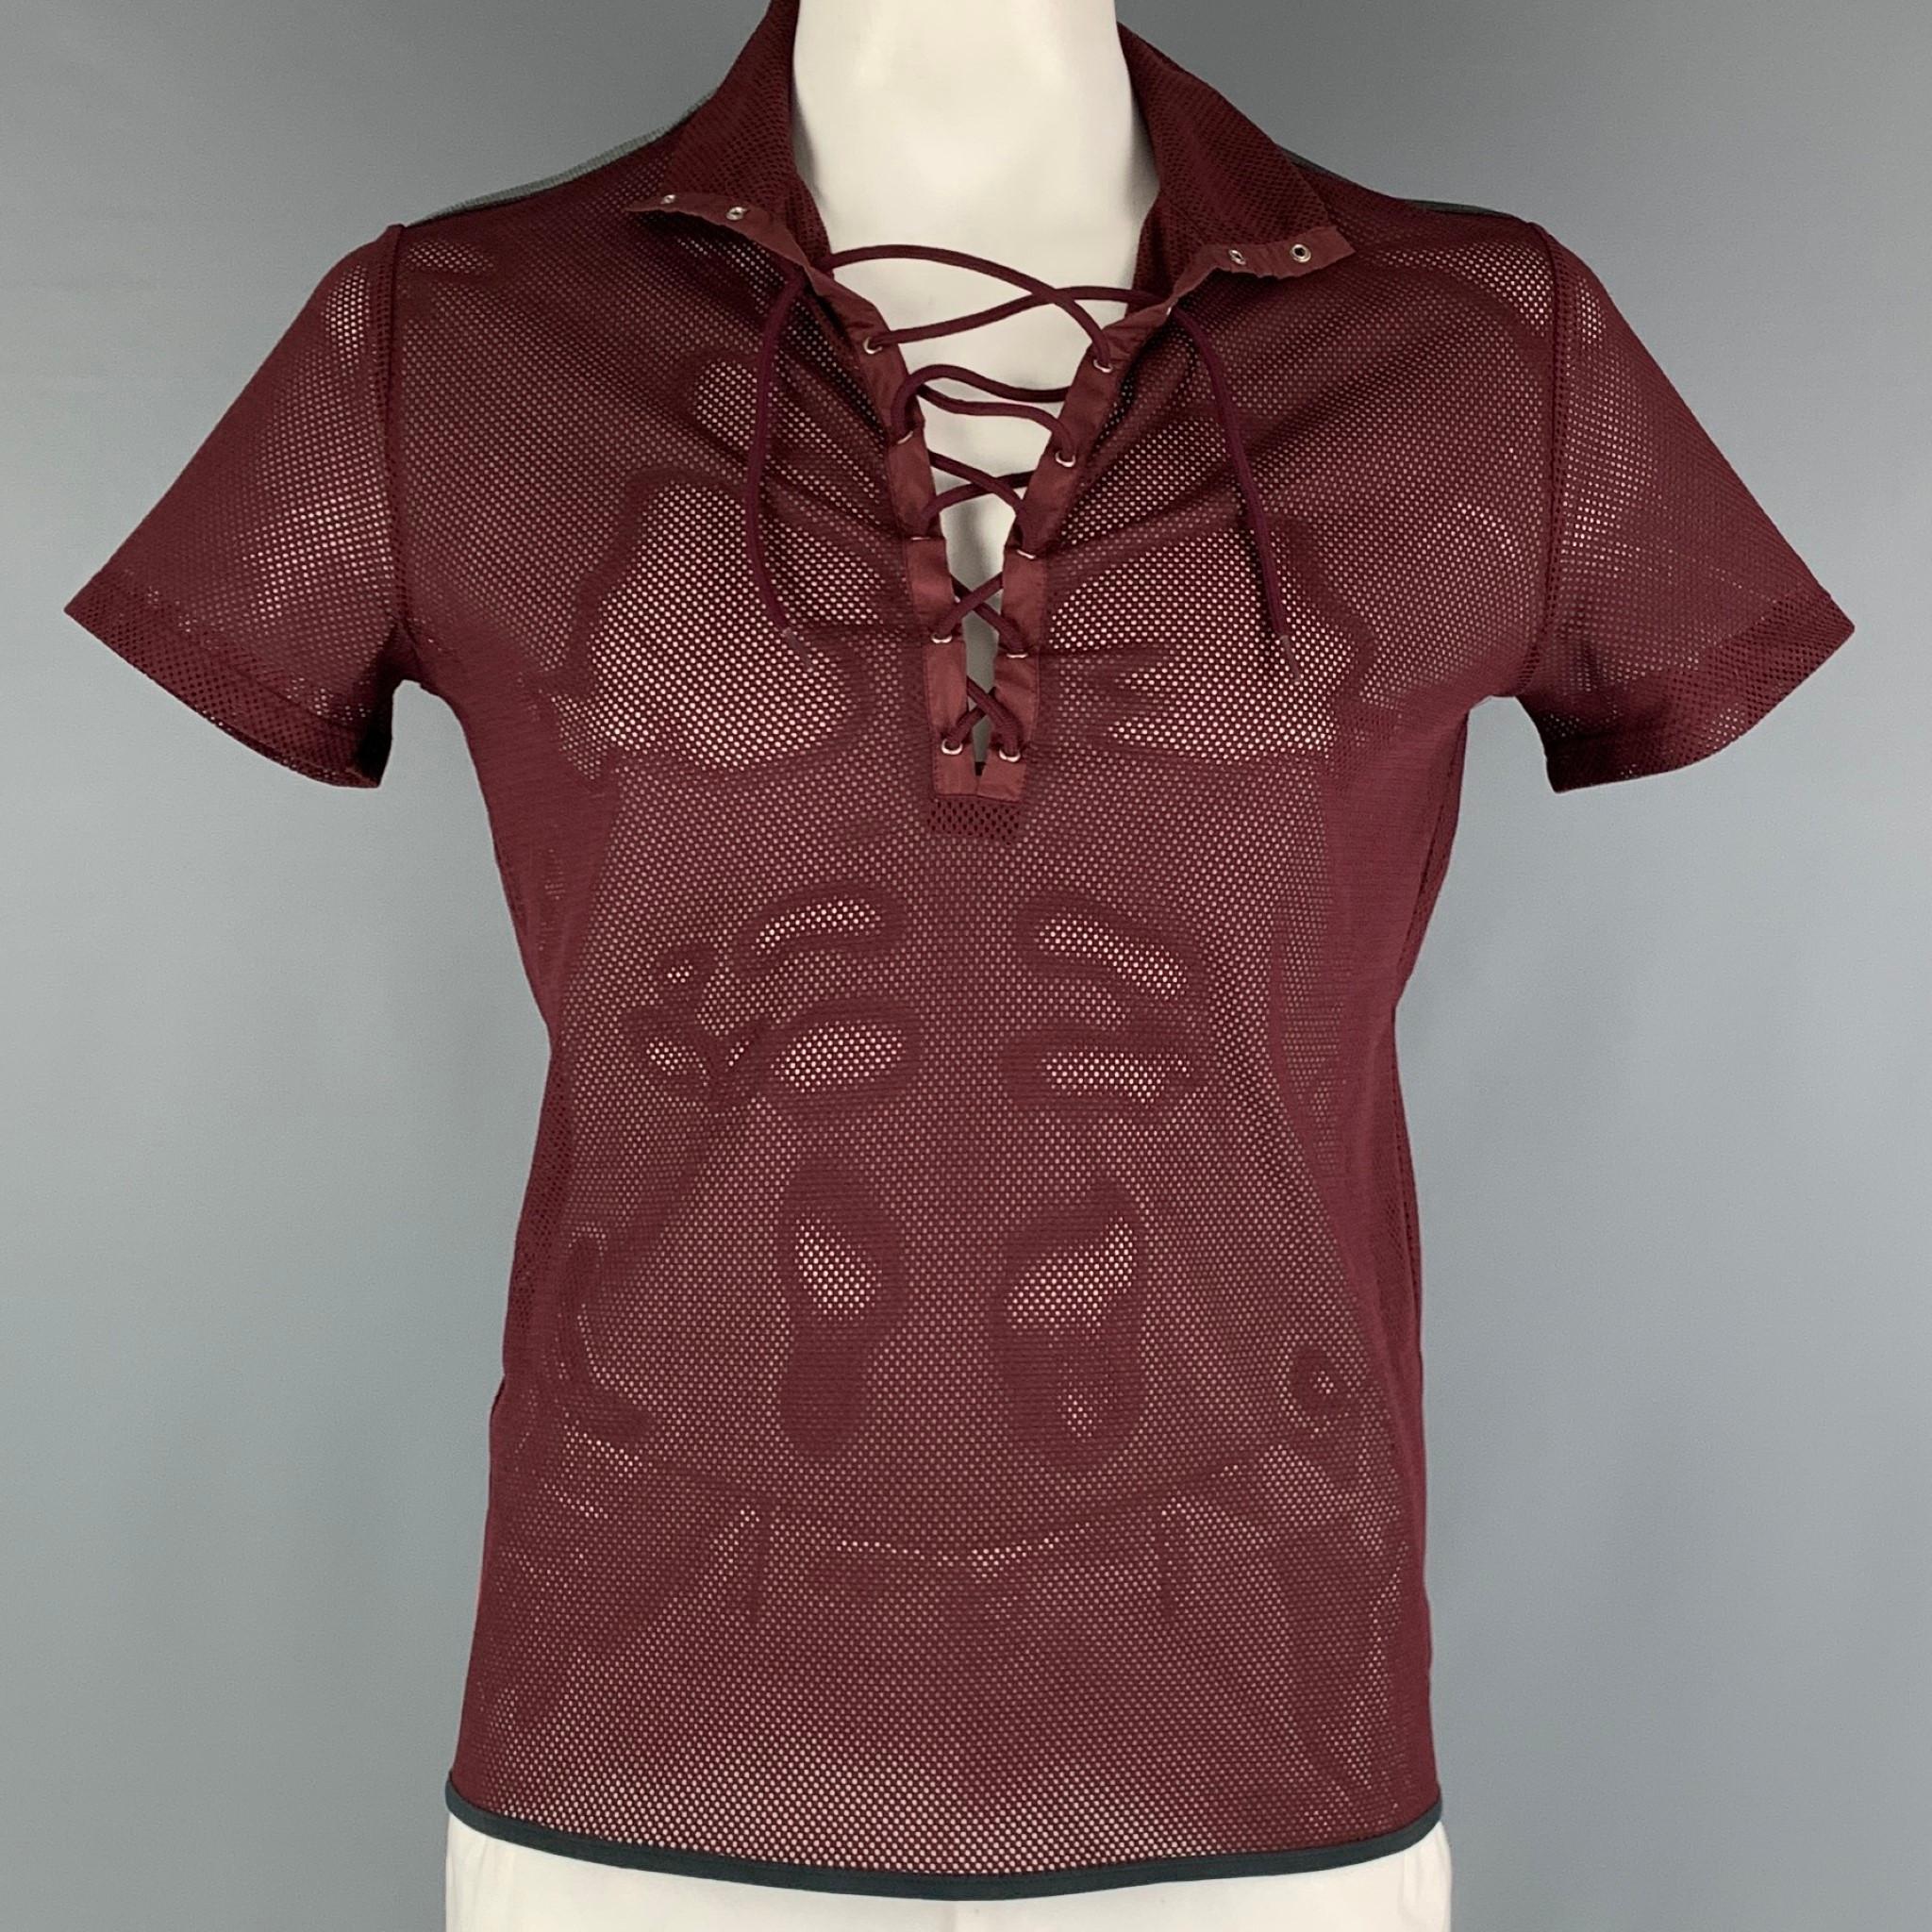 PRADA SPORT 90's T-shirt comes in a burgundy polyester mesh knit material featuring a lace up V-neck and a see through style. Made in Italy.

Very Good Pre-Owned Condition. Minor signs of wear.
Marked: L

Measurements:

Shoulder: 18 in.
Chest: 44